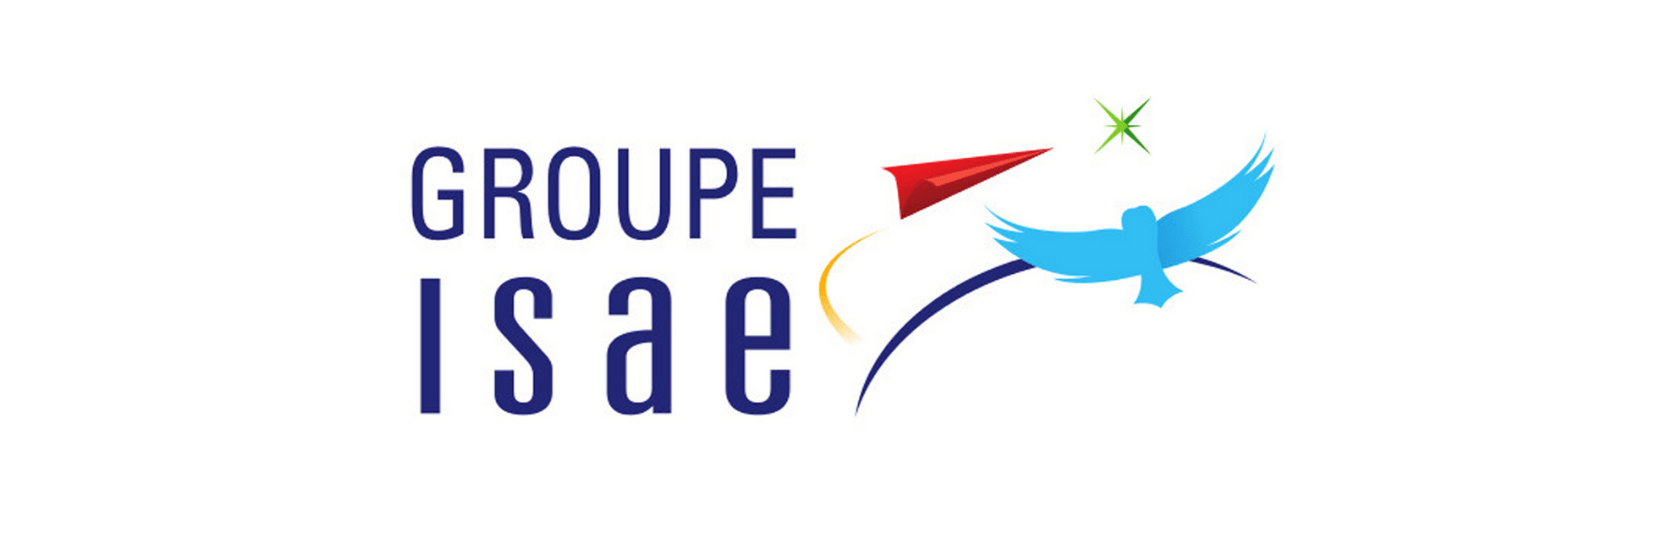 Le groupe ISAE crée une alliance « ISAE Nouvelle-Aquitaine »